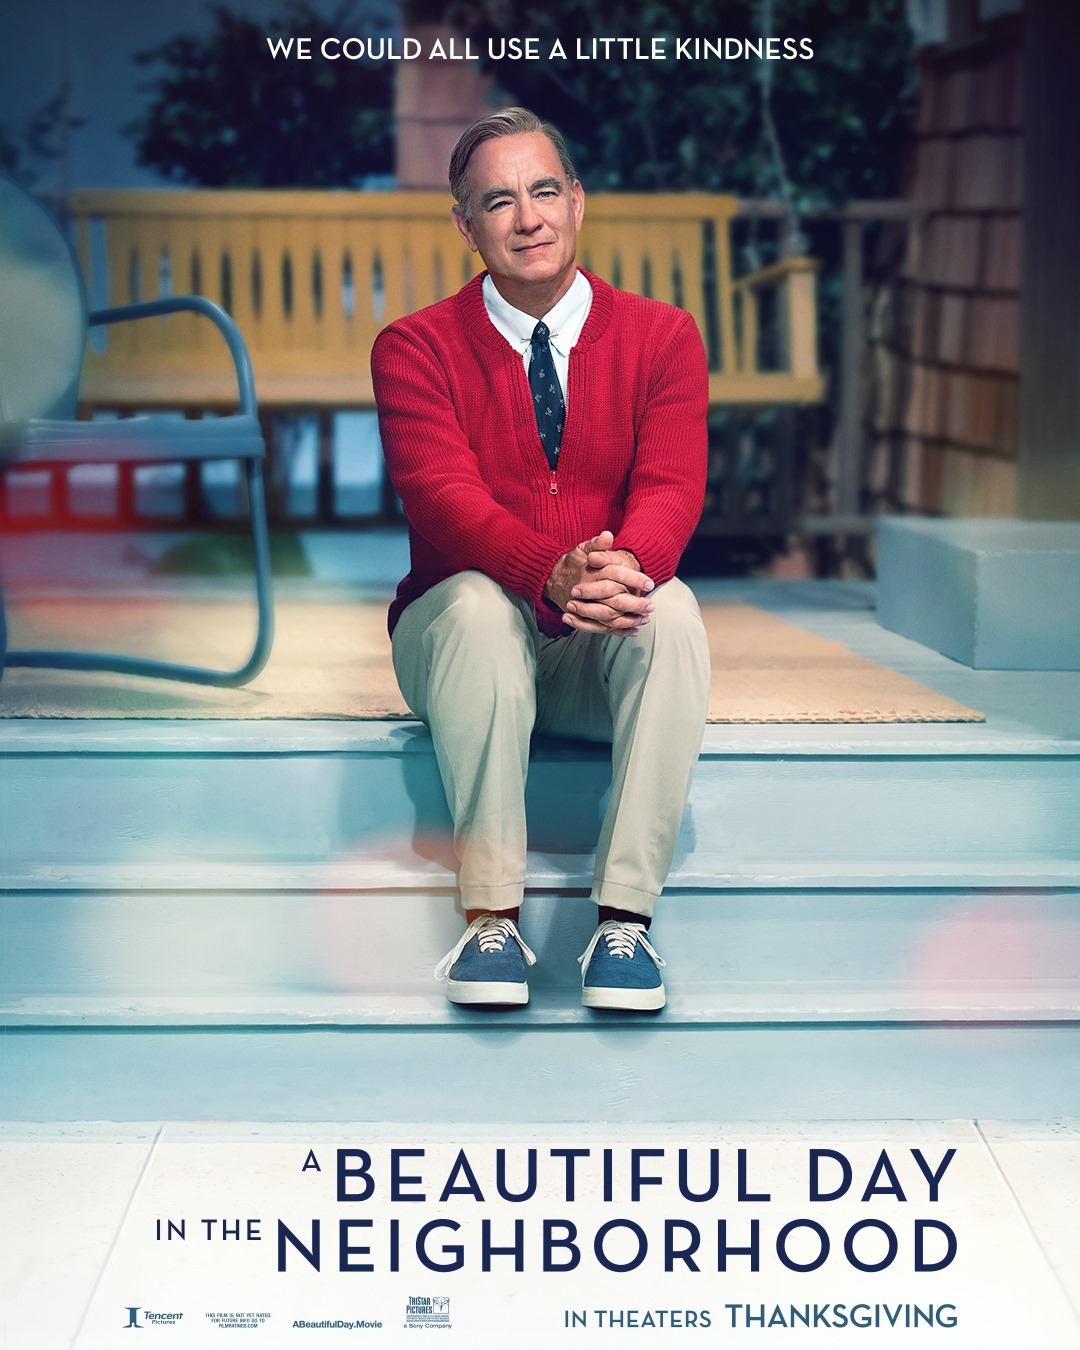 A Beautiful Day in the Neighborhood poster